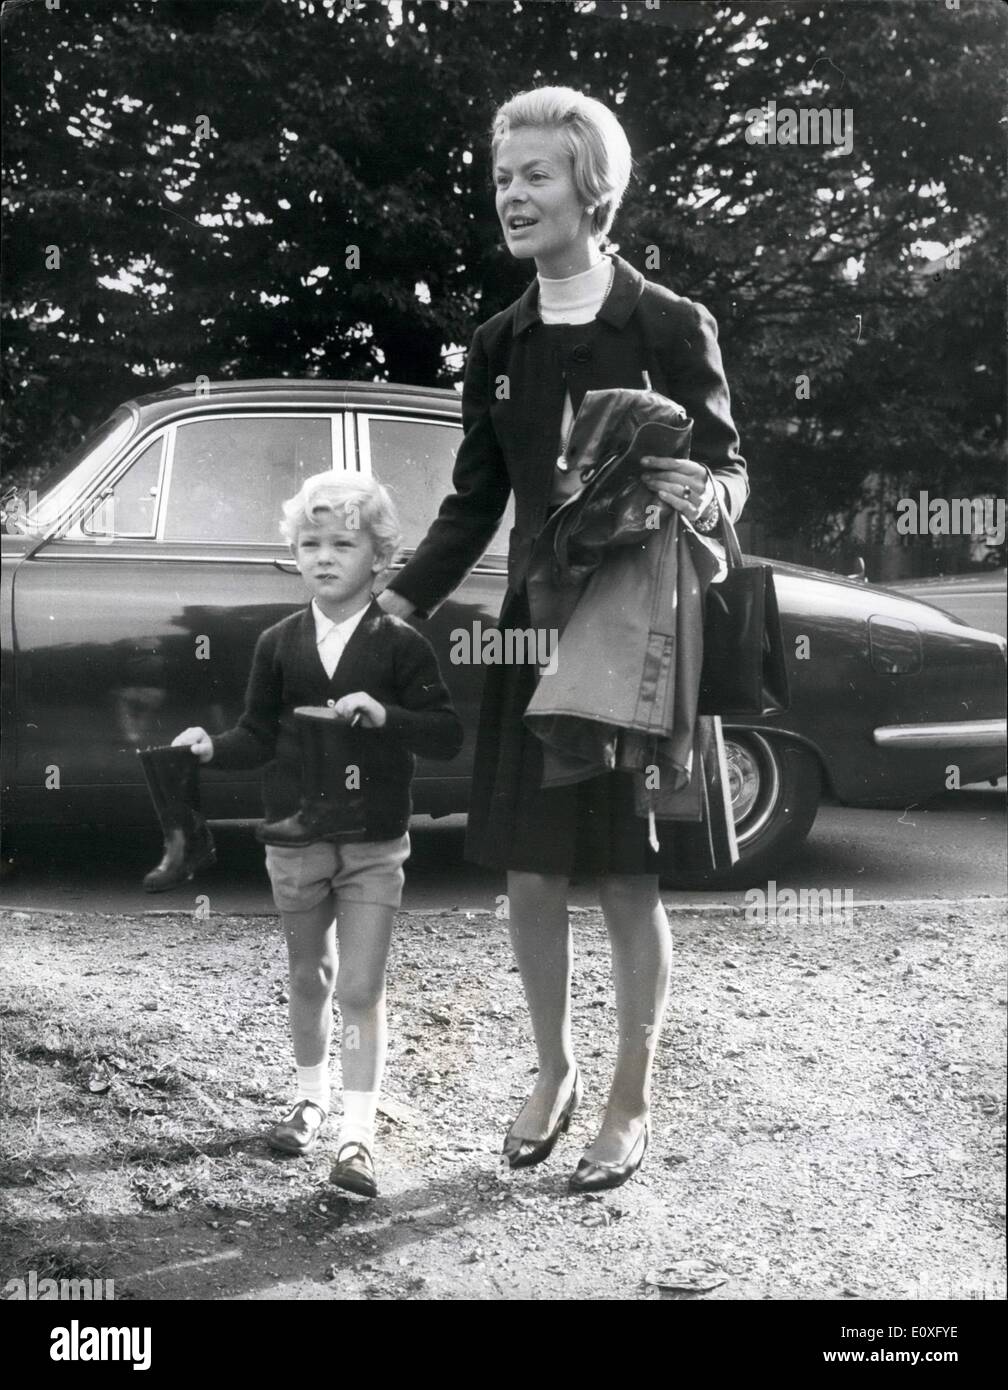 Sep. 09, 1966 - Earl of St. Andrews starts school: The four year old EARL OF ST. ANDREWS, son of the Duke and Duchess of Kent started school this morning. He was taken to the PNU School, at Dtchet, ueke, by his mother. Headmistress of P.N.E.U. School (it stands for Parents' National Education Union), is Miss Eve Anderson. The Earl, who will be known as ''George'' to the other lad, will travel by car each day from his home at Iver, and will join 12 other boys in the nursery clans, under Mrs. Ruth Stanley. Photo shows holding a pair of Wellington boots - the young EARL OF ST Stock Photo